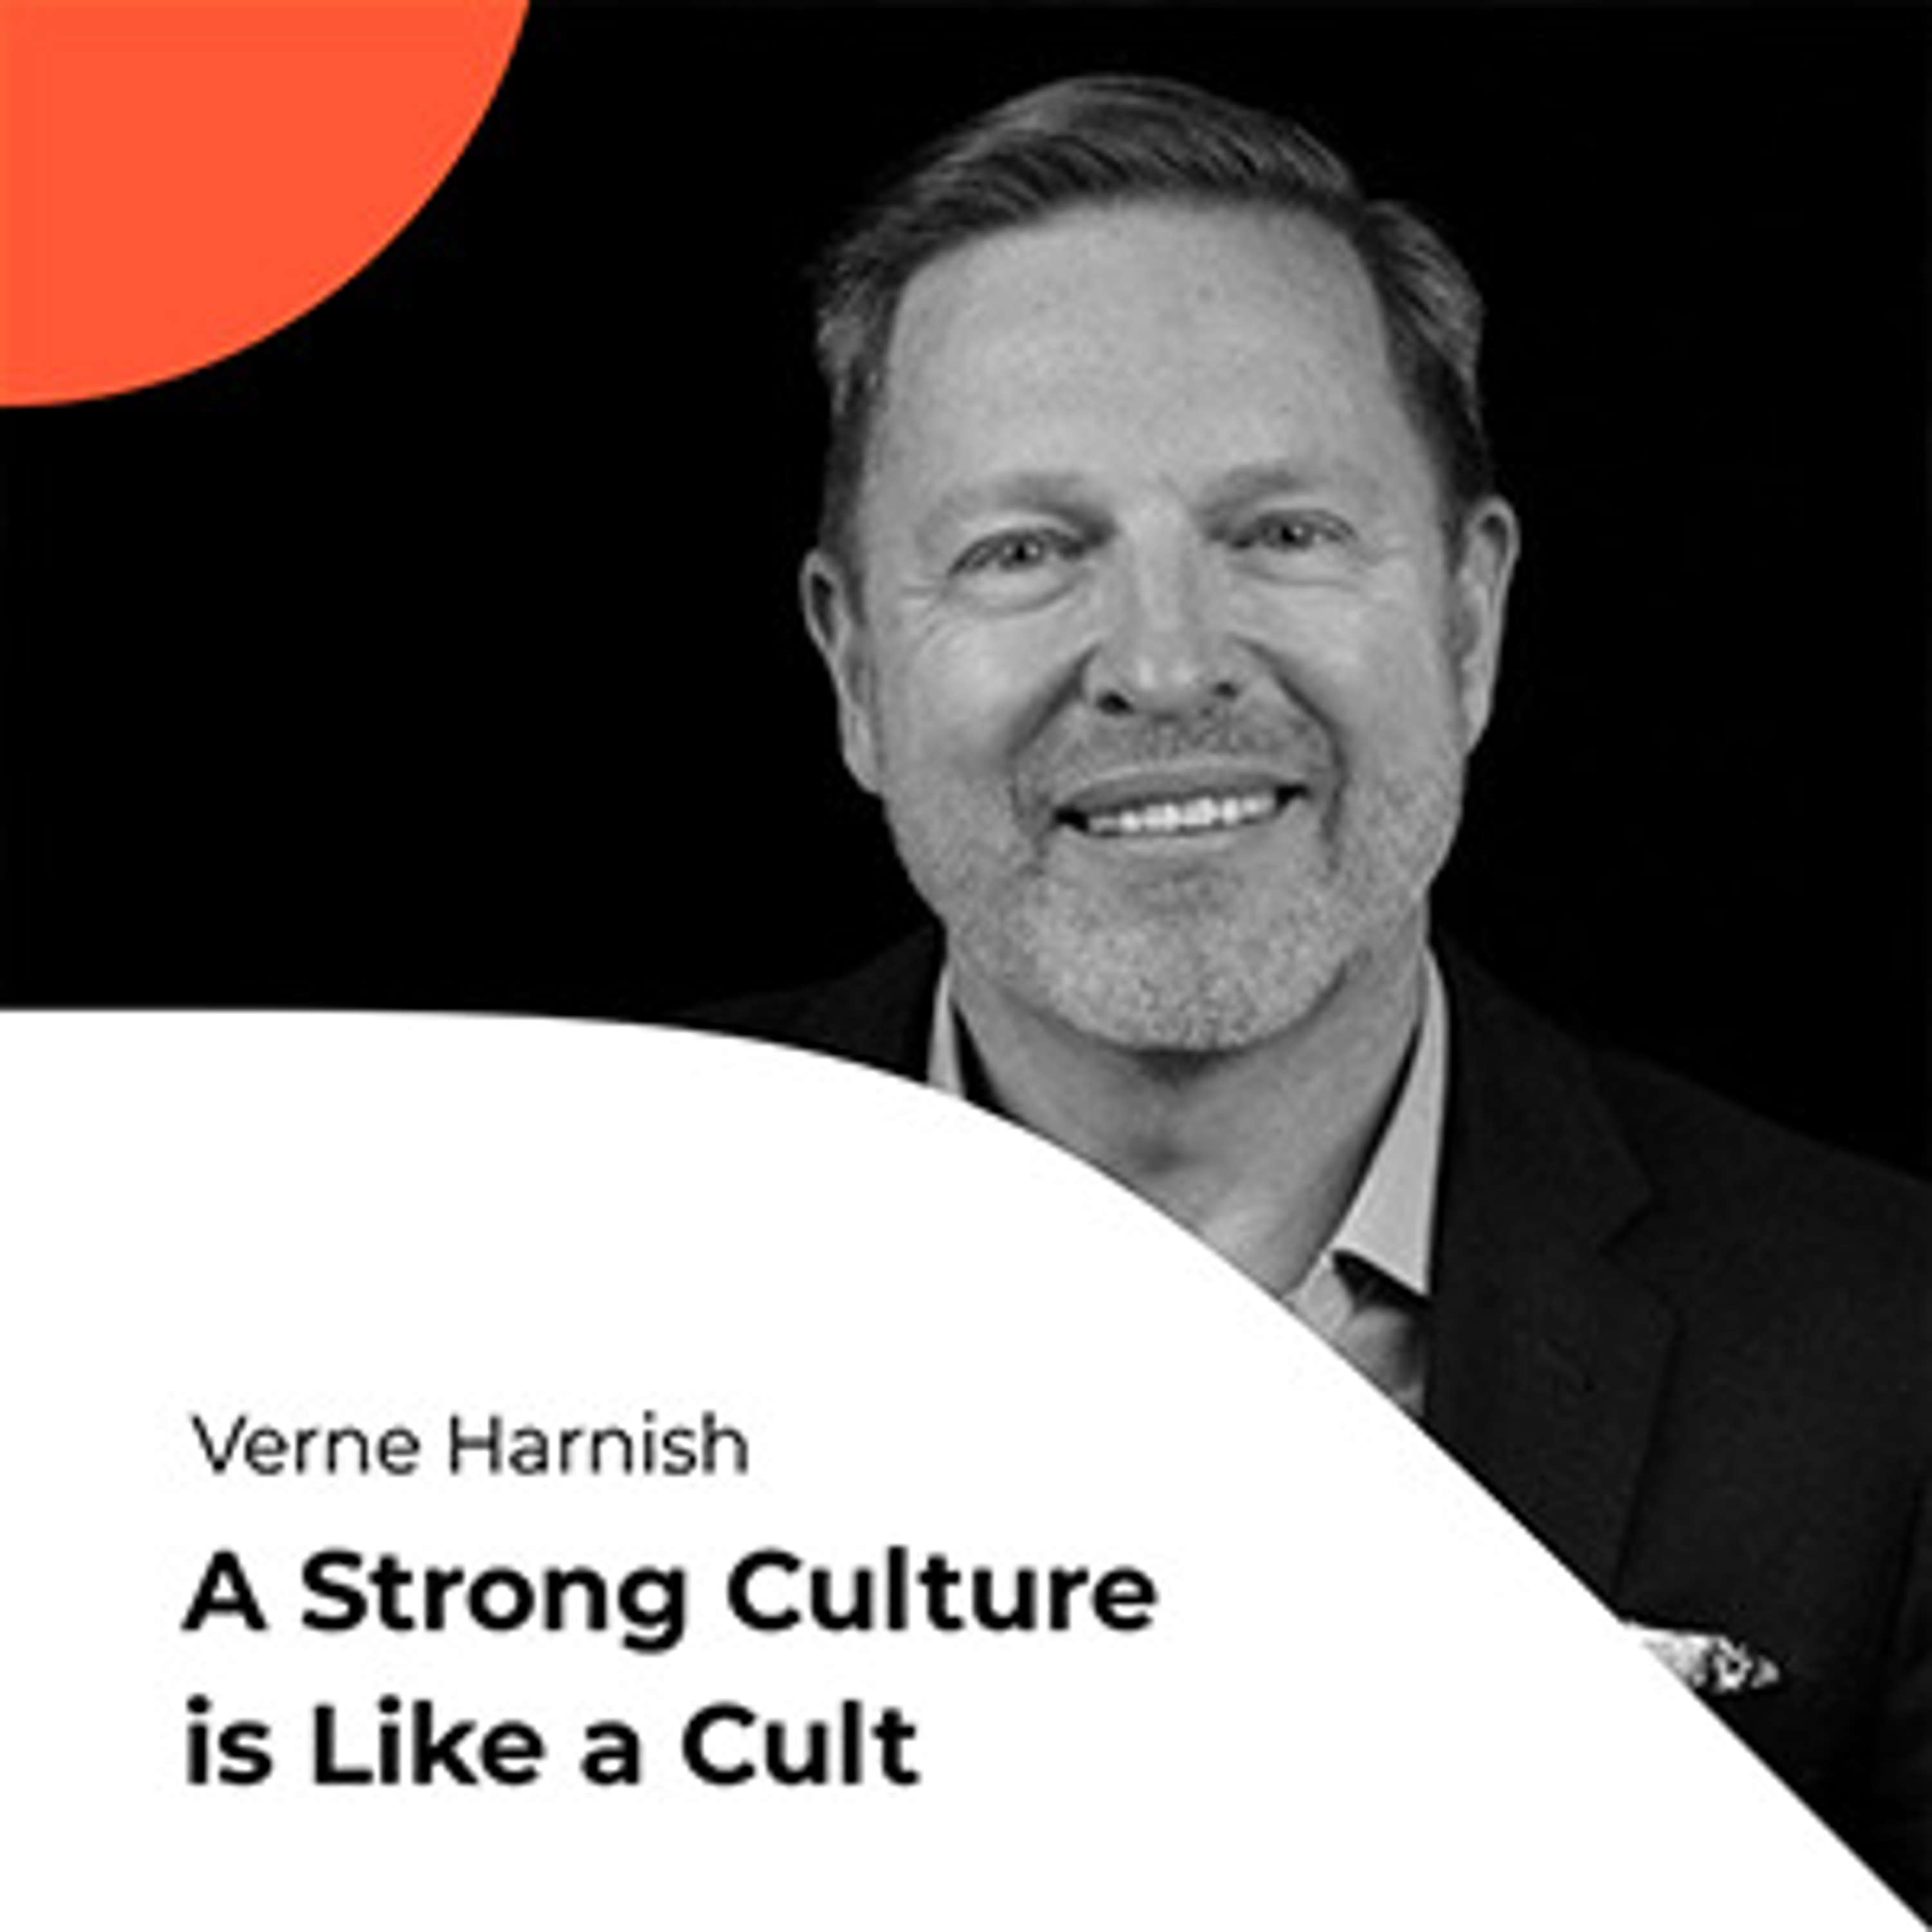 S01E12 A Strong Culture is Like a Cult, with Verne Harnish